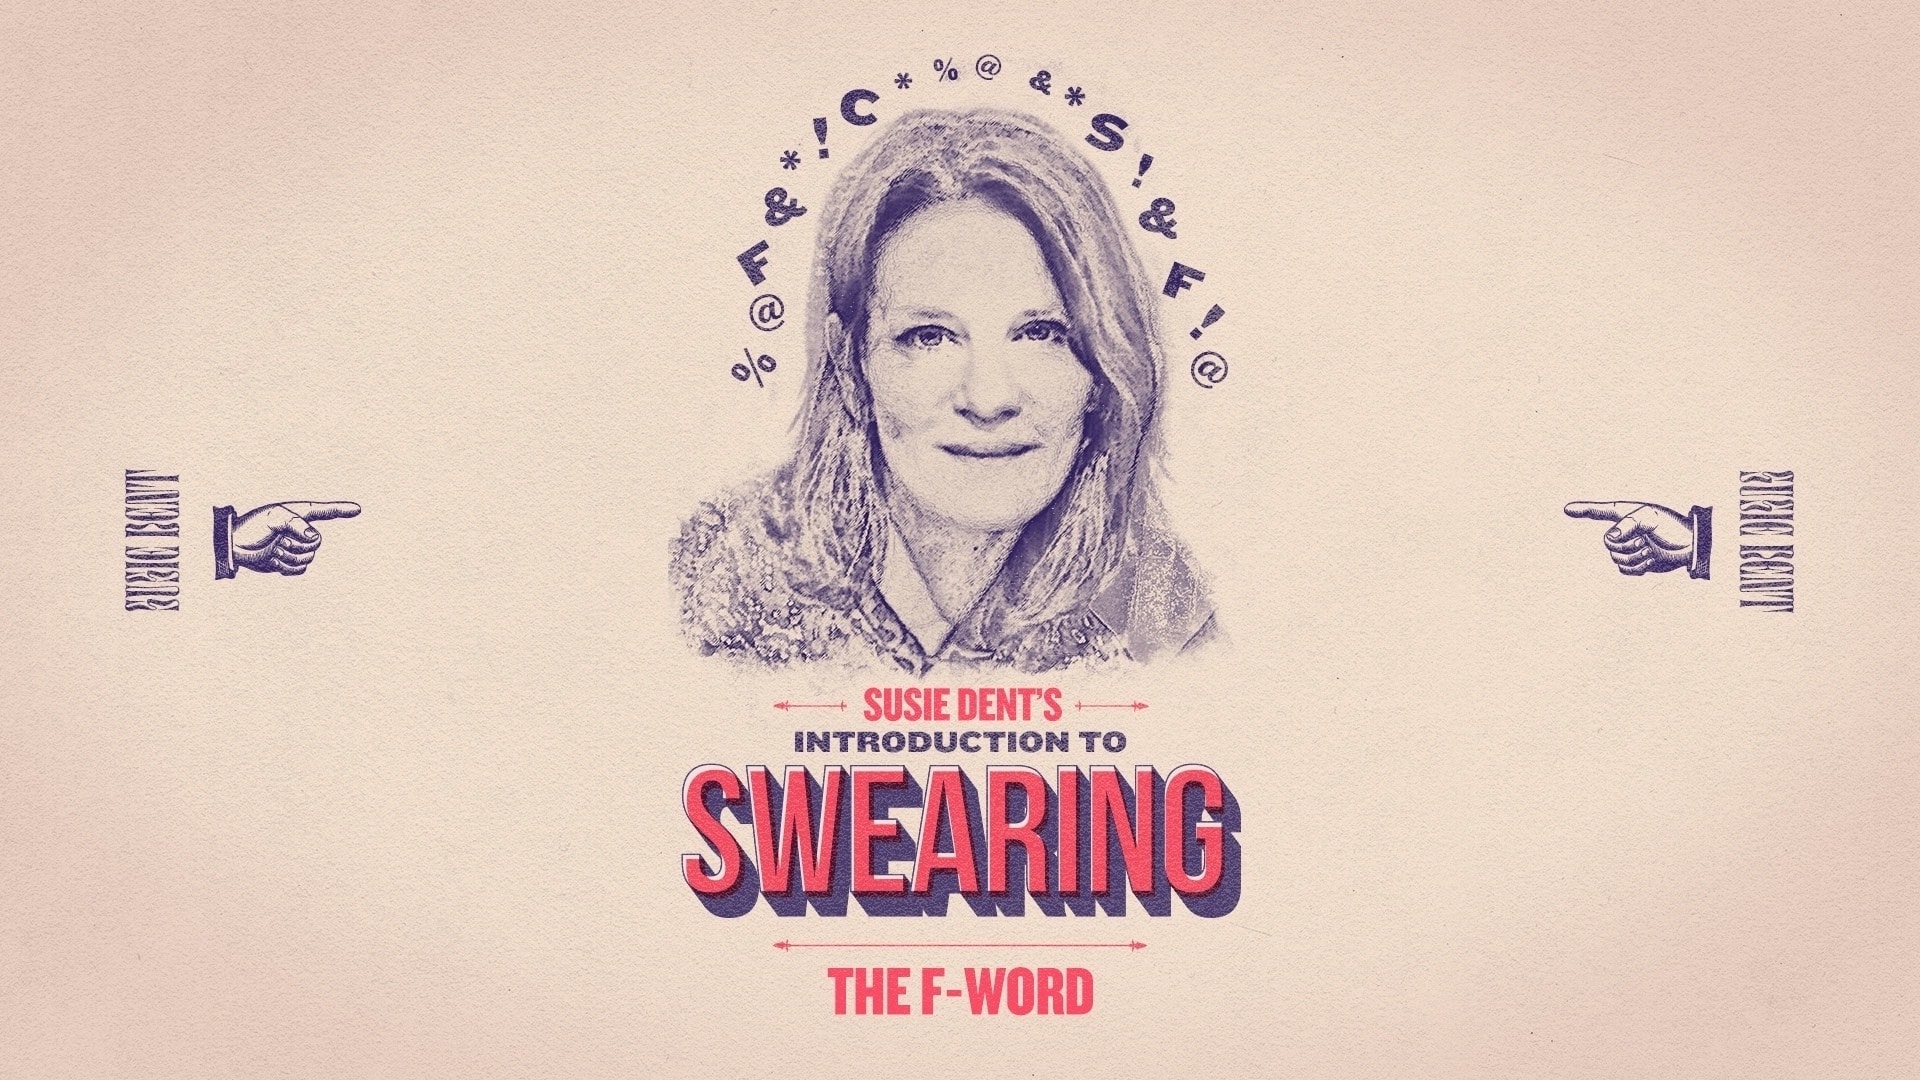 Susie Dent's introduction to swearing